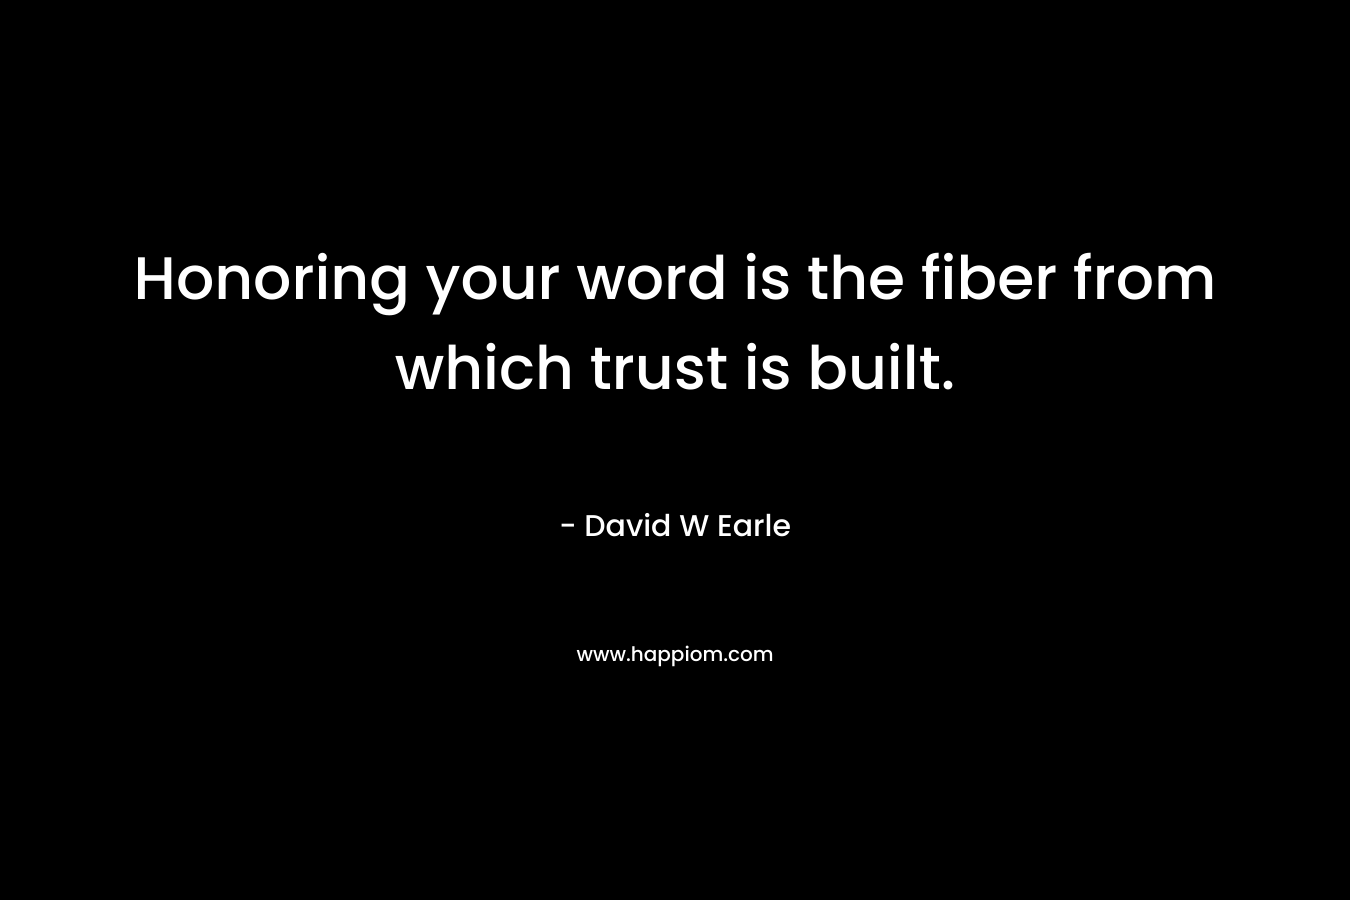 Honoring your word is the fiber from which trust is built. – David W Earle